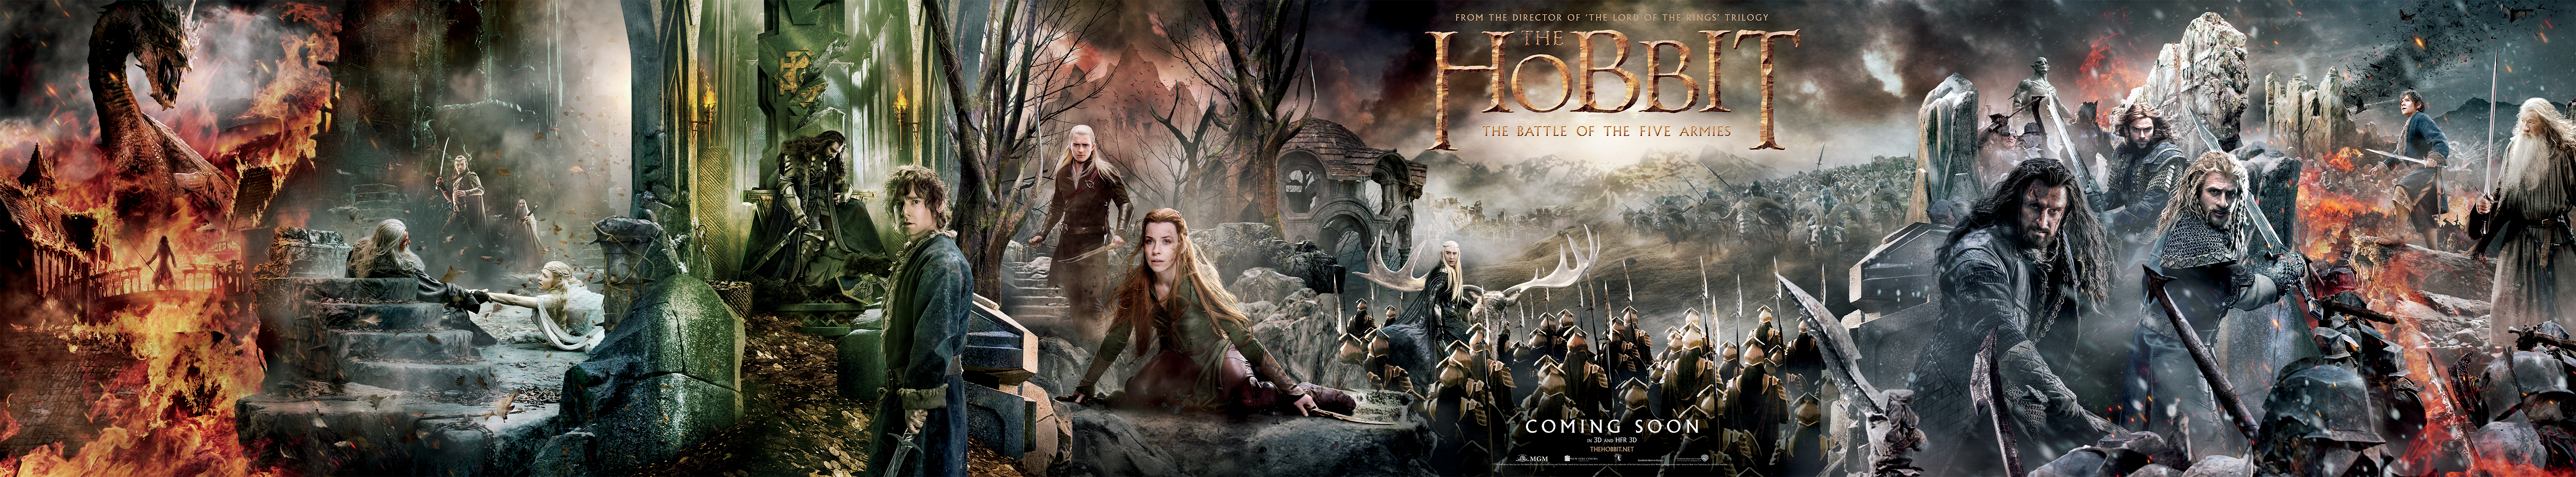 http://i2.cdnds.net/14/38/movies-the-hobbit-the-battle-of-the-five-armies-tapestry-artwork.jpg